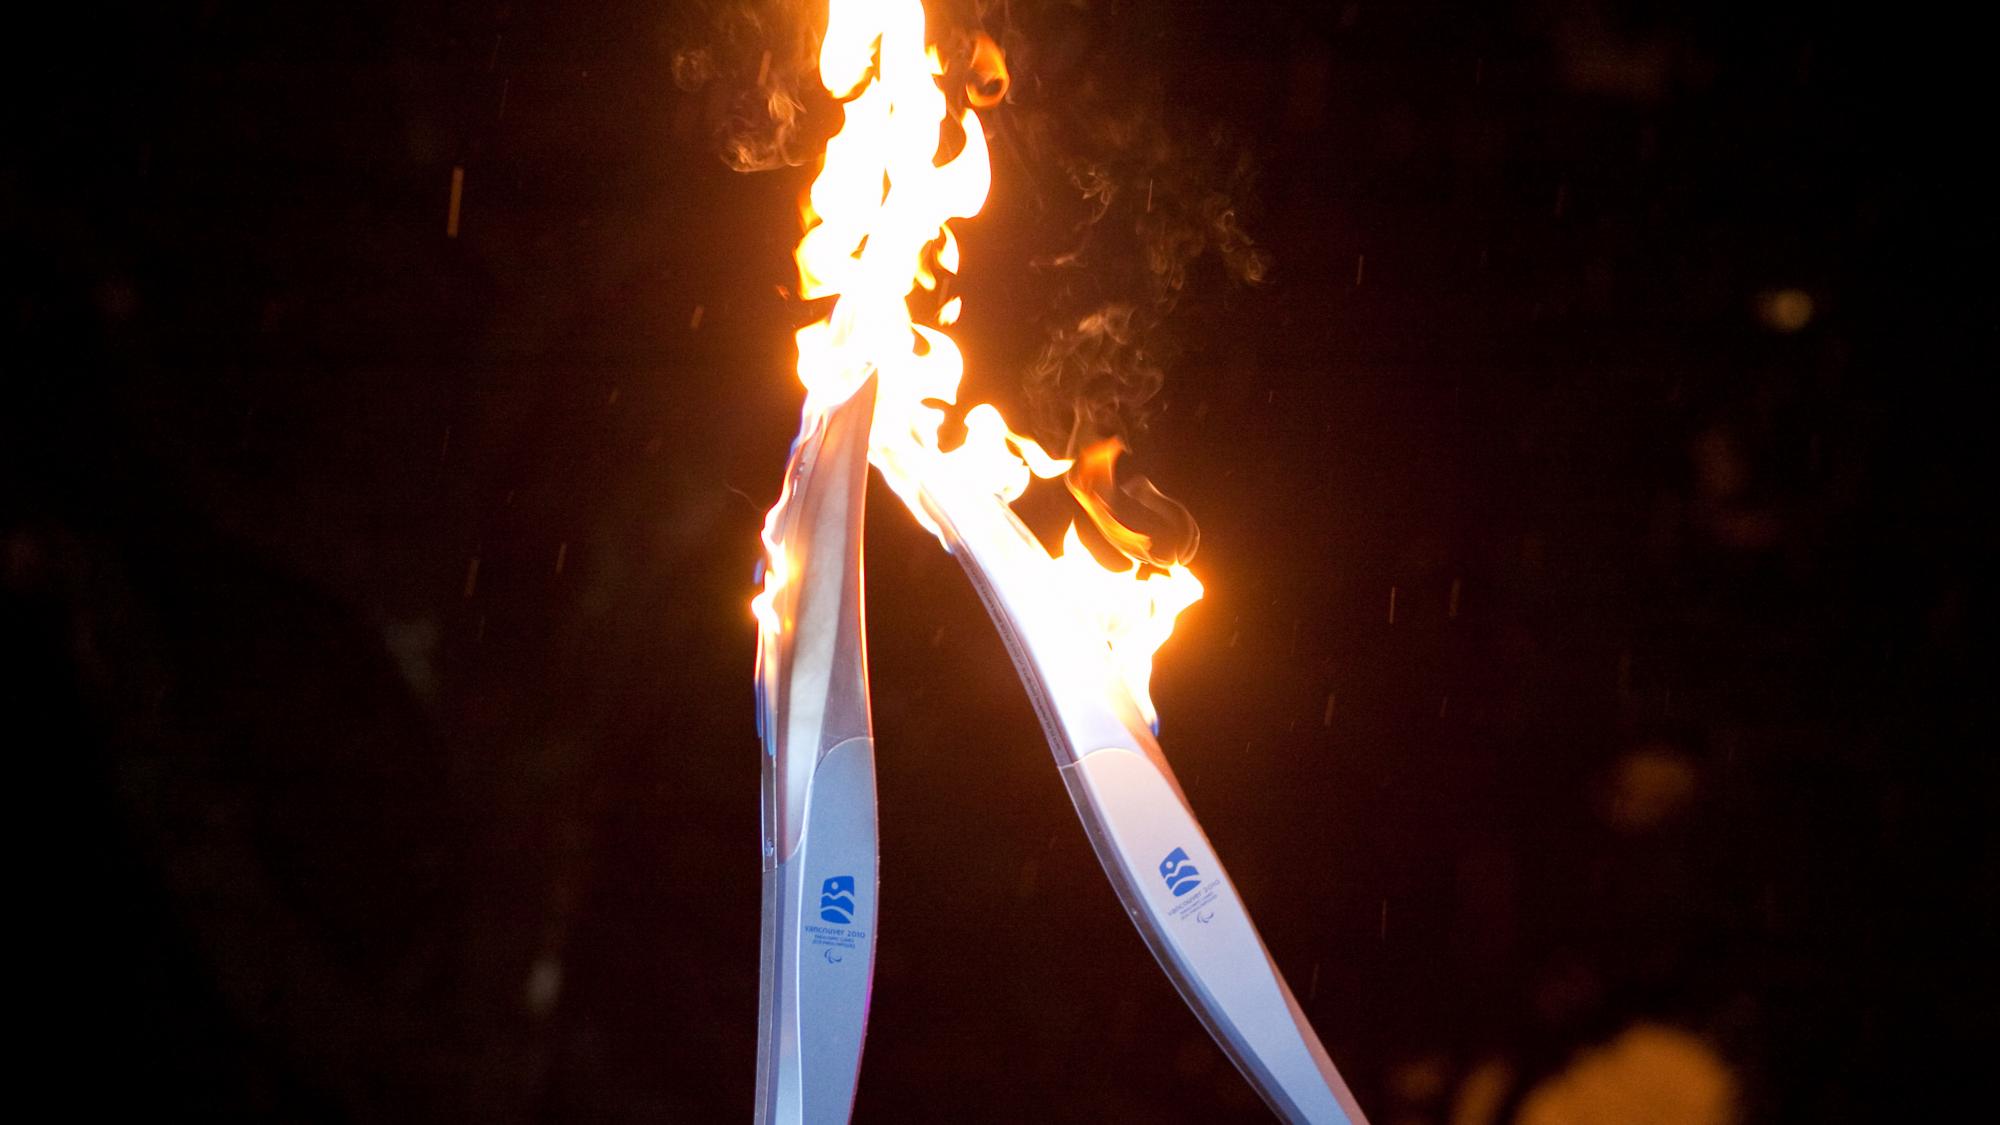 Torch Relay at the Vancouver Games